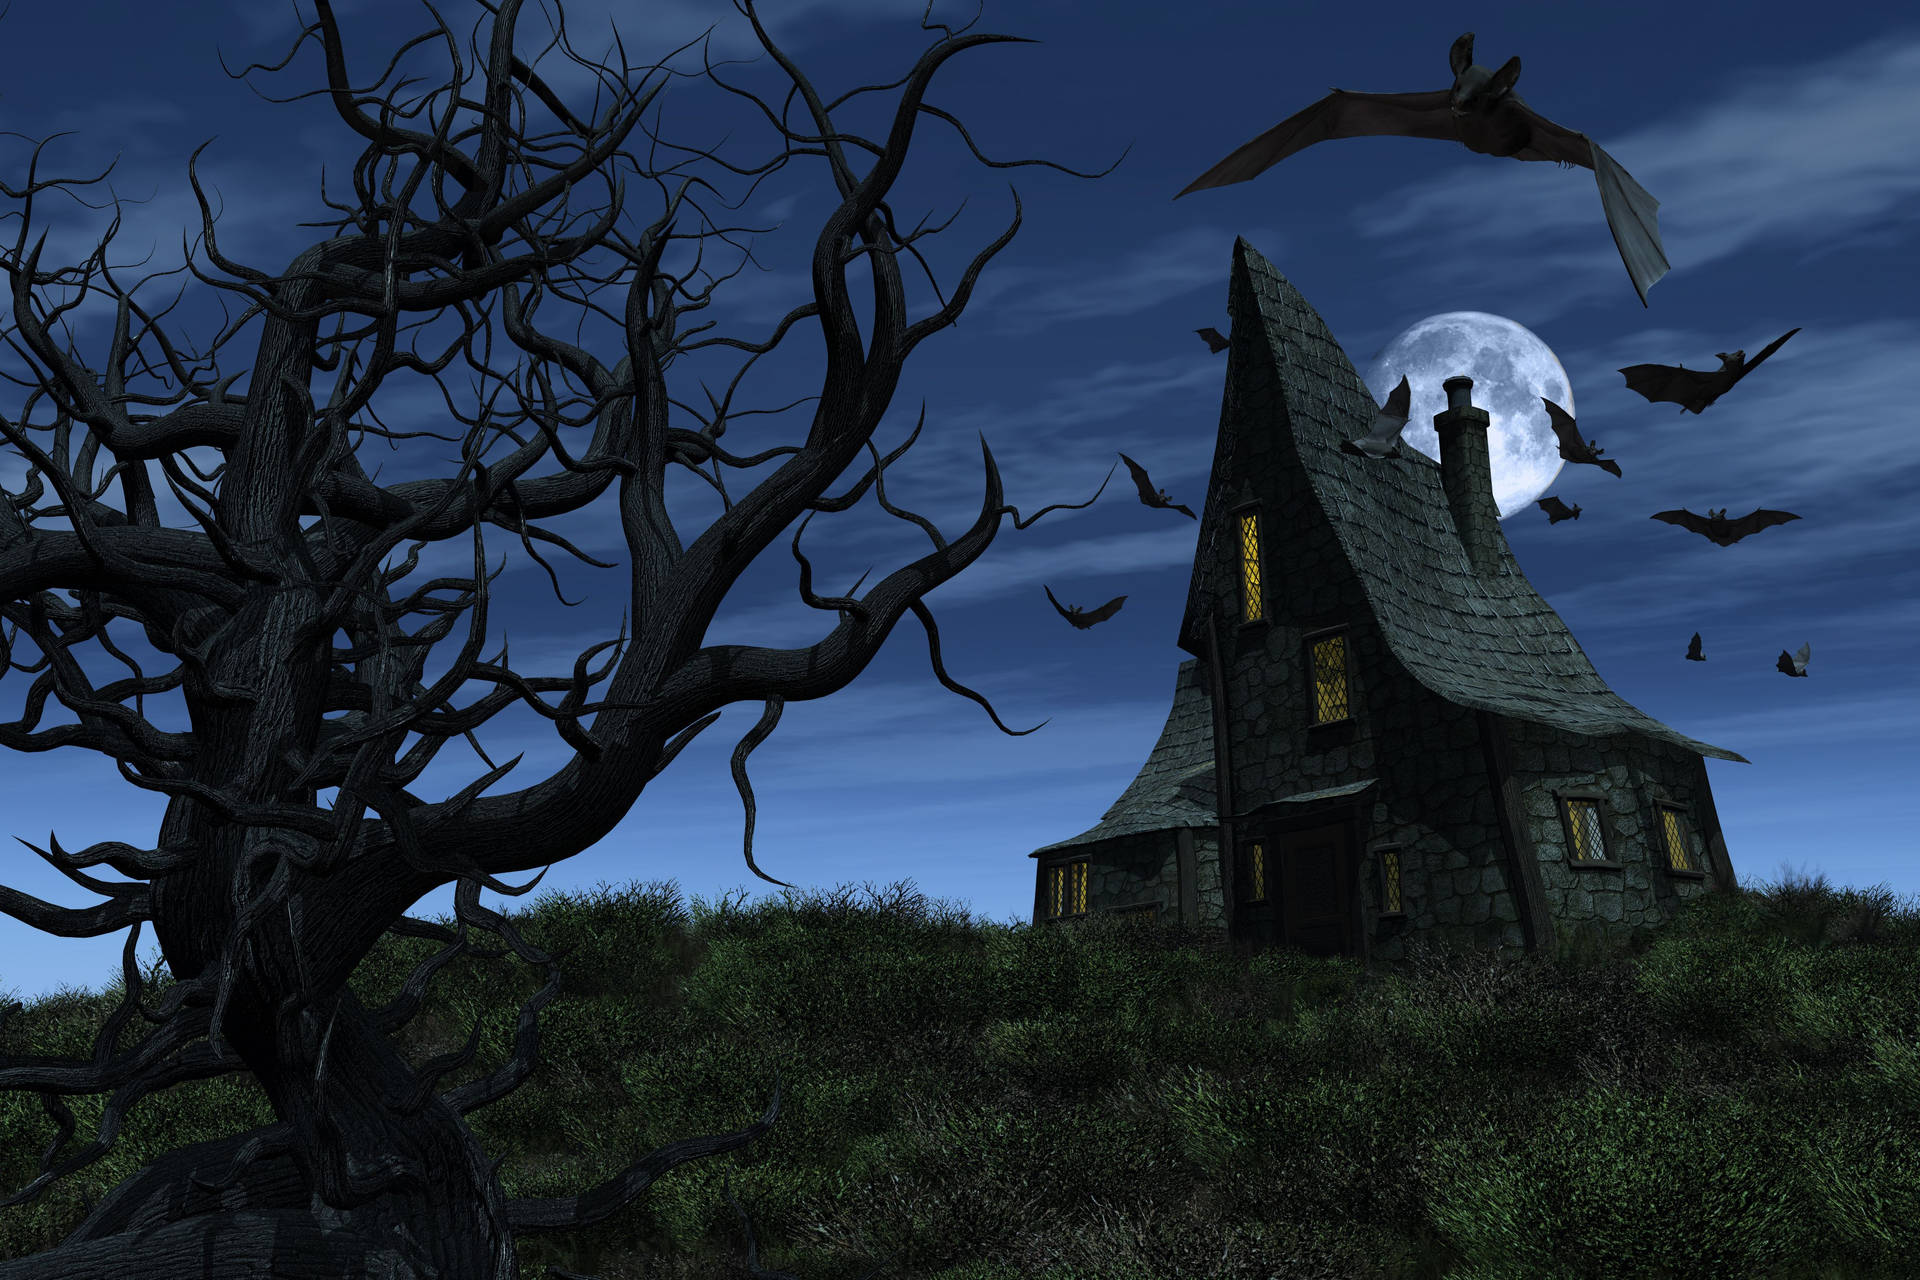 Trick or Treat at the spooky Haunted House this Halloween! Wallpaper